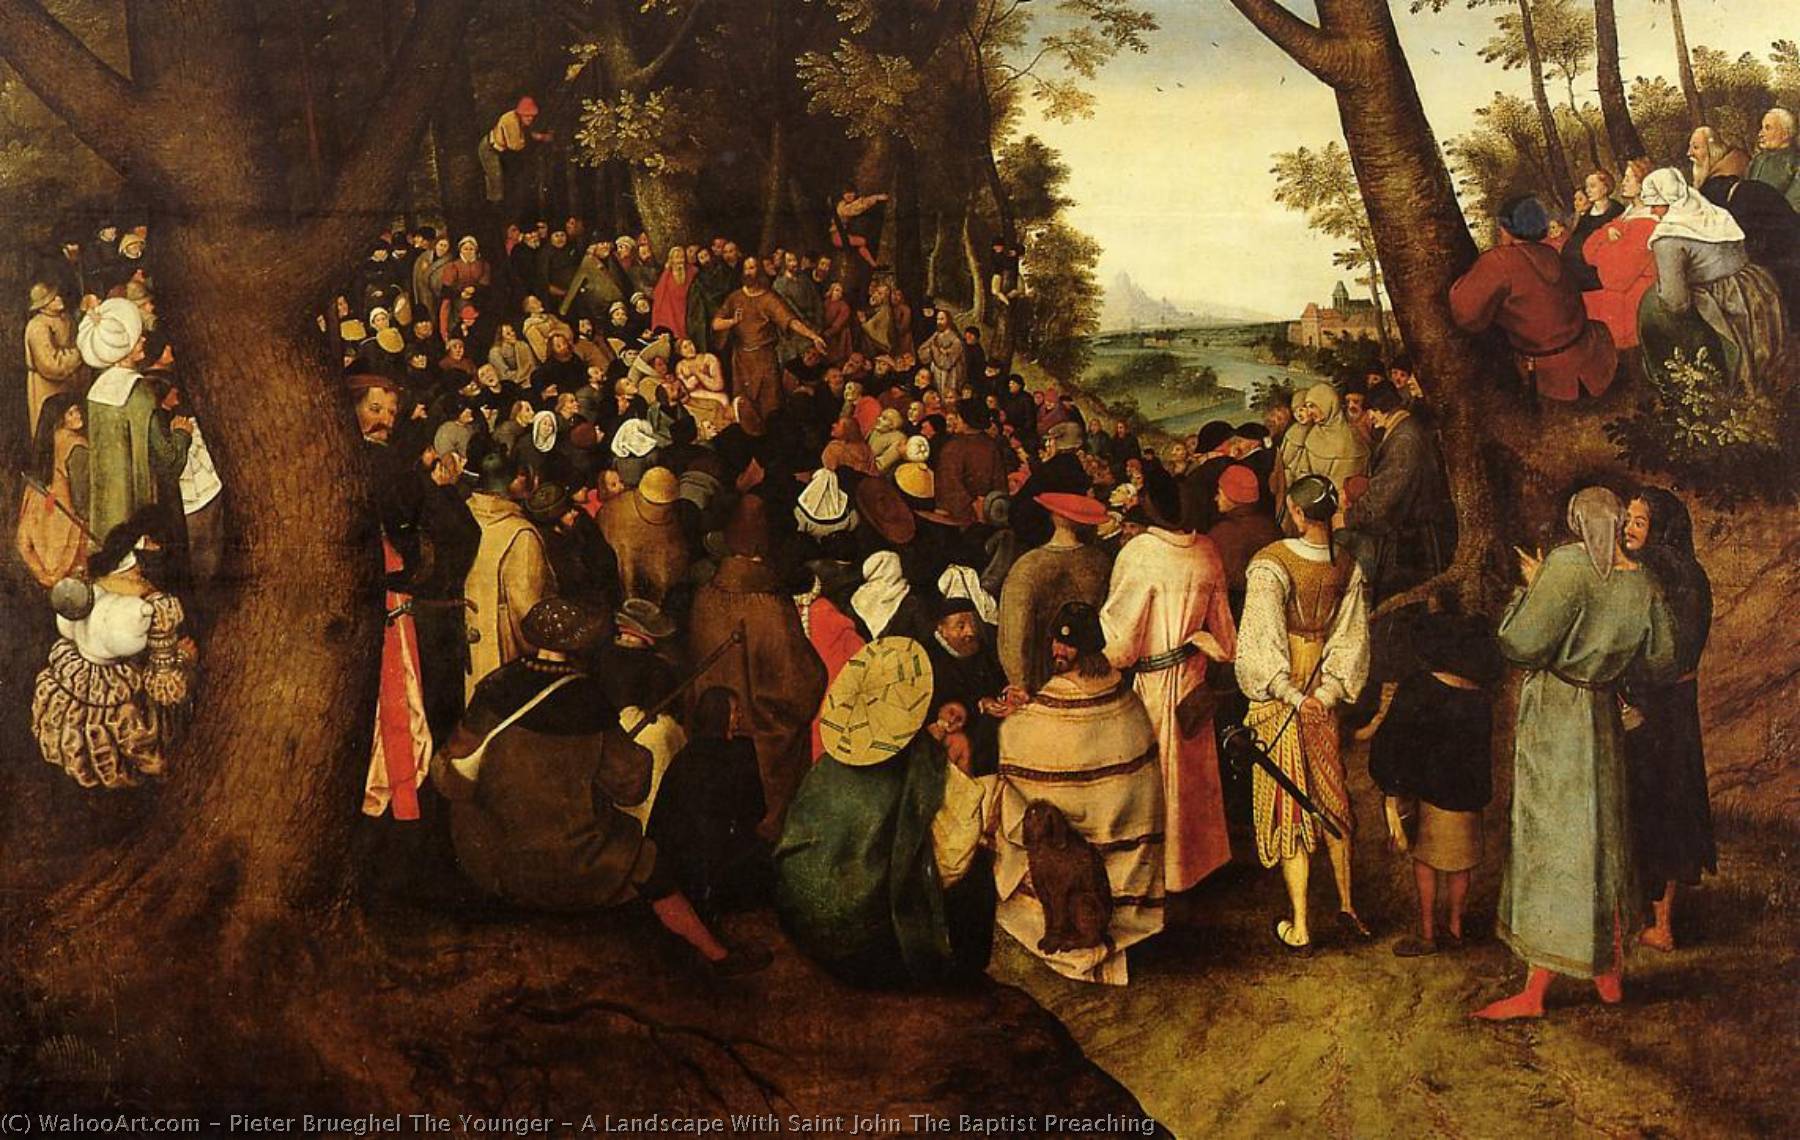 WikiOO.org - 백과 사전 - 회화, 삽화 Pieter Brueghel The Younger - A Landscape With Saint John The Baptist Preaching